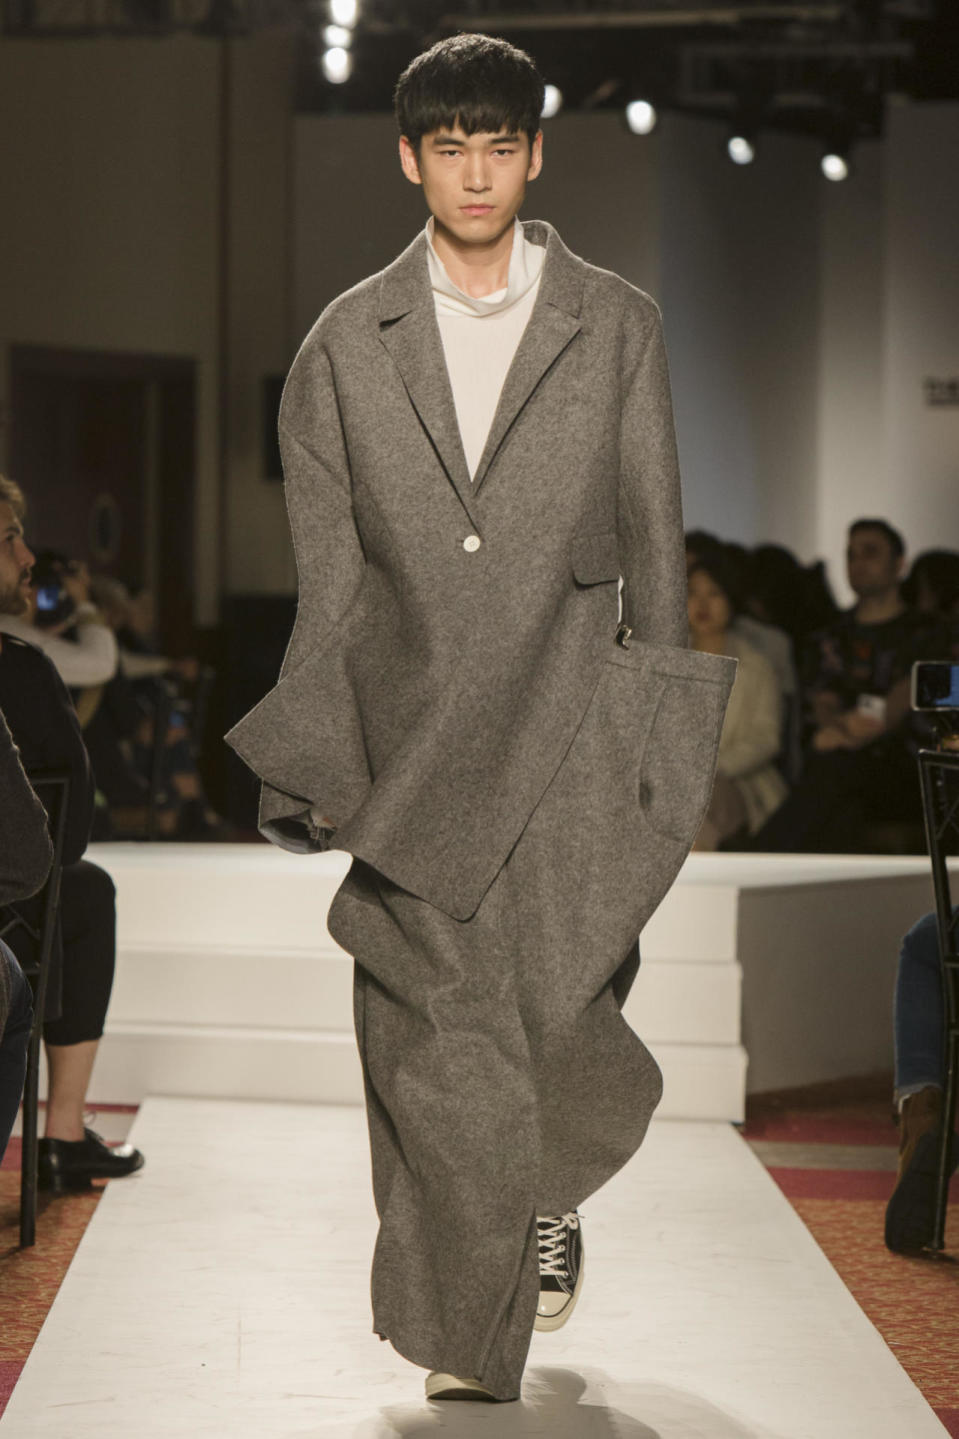 Parsons graduate Ming Peng’s look was an oversized suit gone askew in a cartoonish but very cool way.